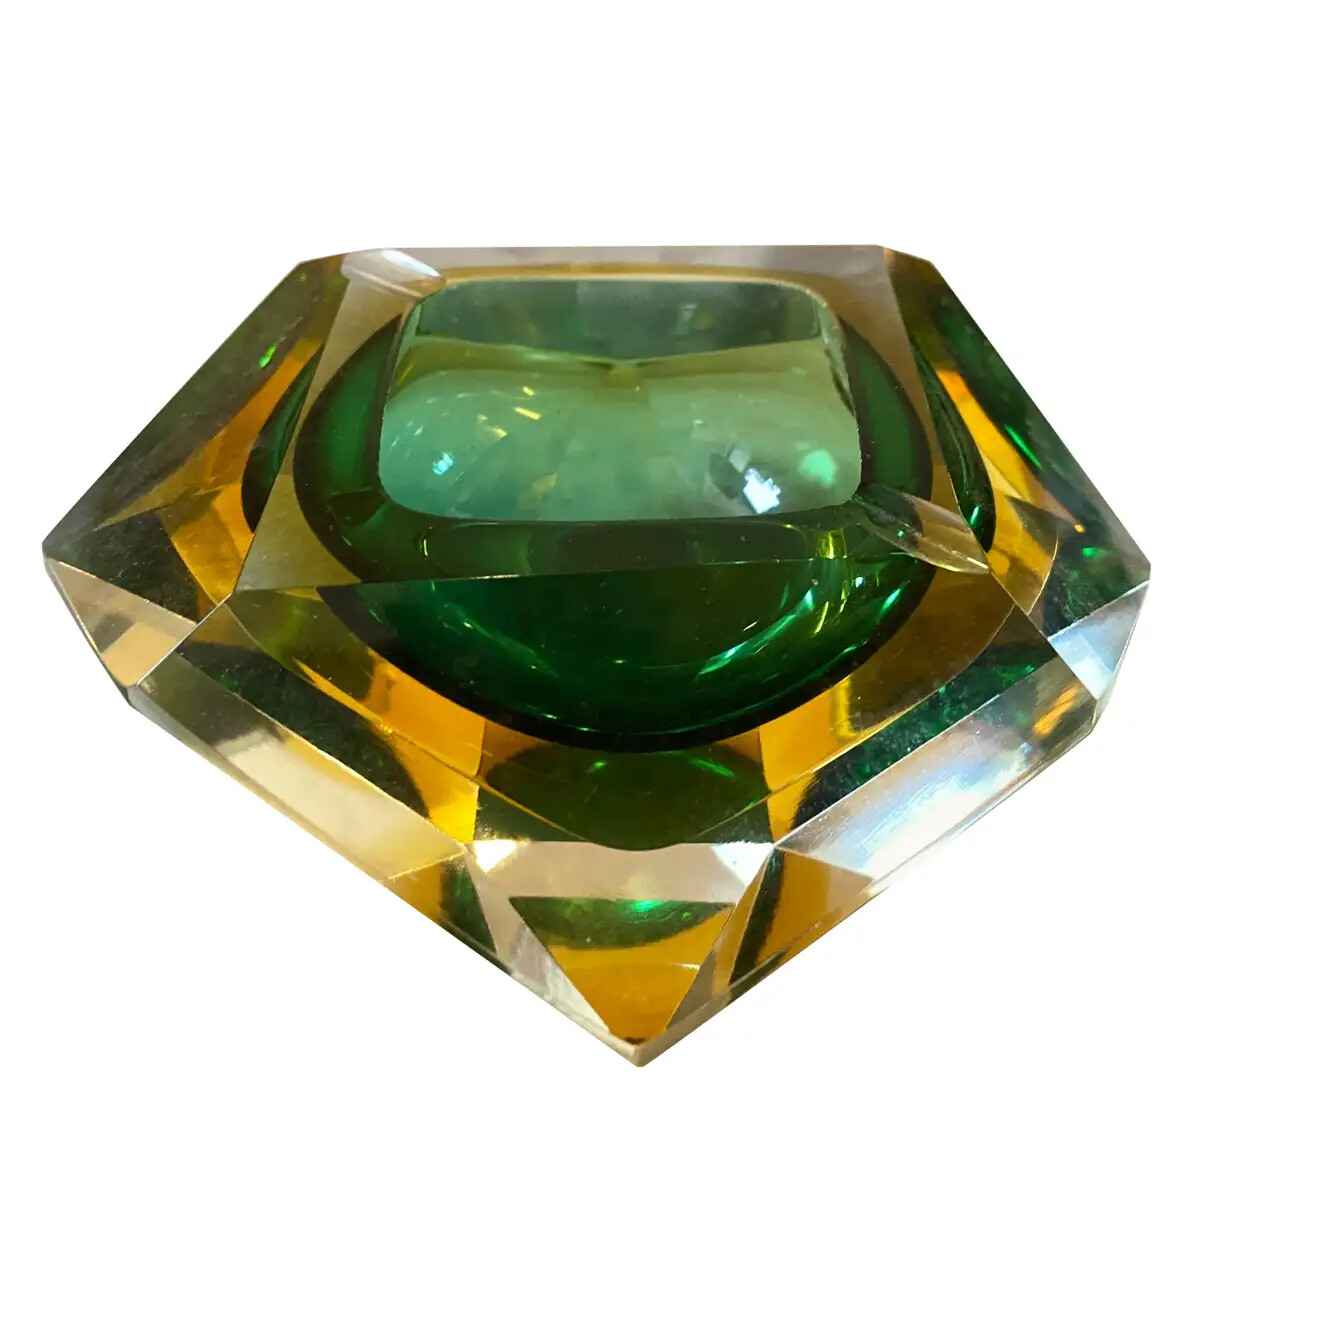 1970s Modernist Faceted Murano Glass Ashtray by Seguso